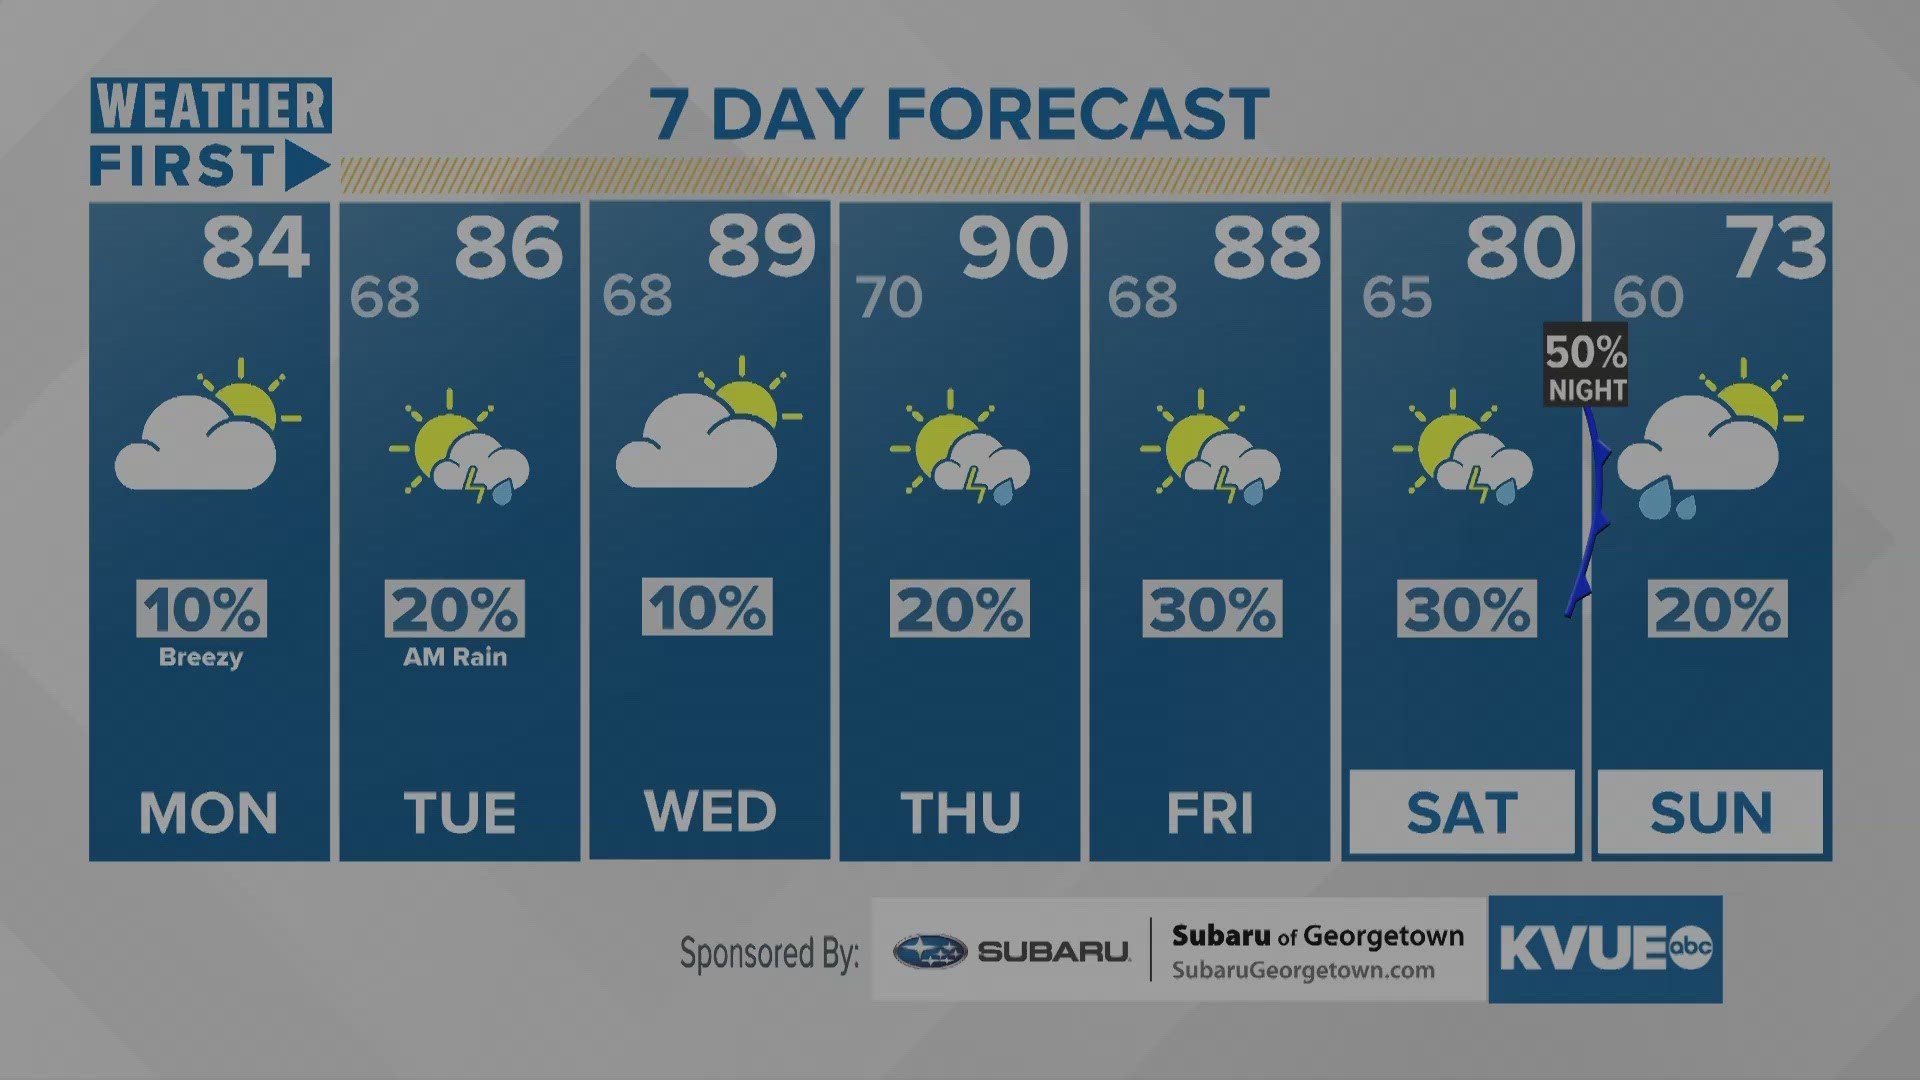 Wetter and warmer trend this week. Highs in the 90s starting Wednesday. Strong to severe storms possible this weekend.